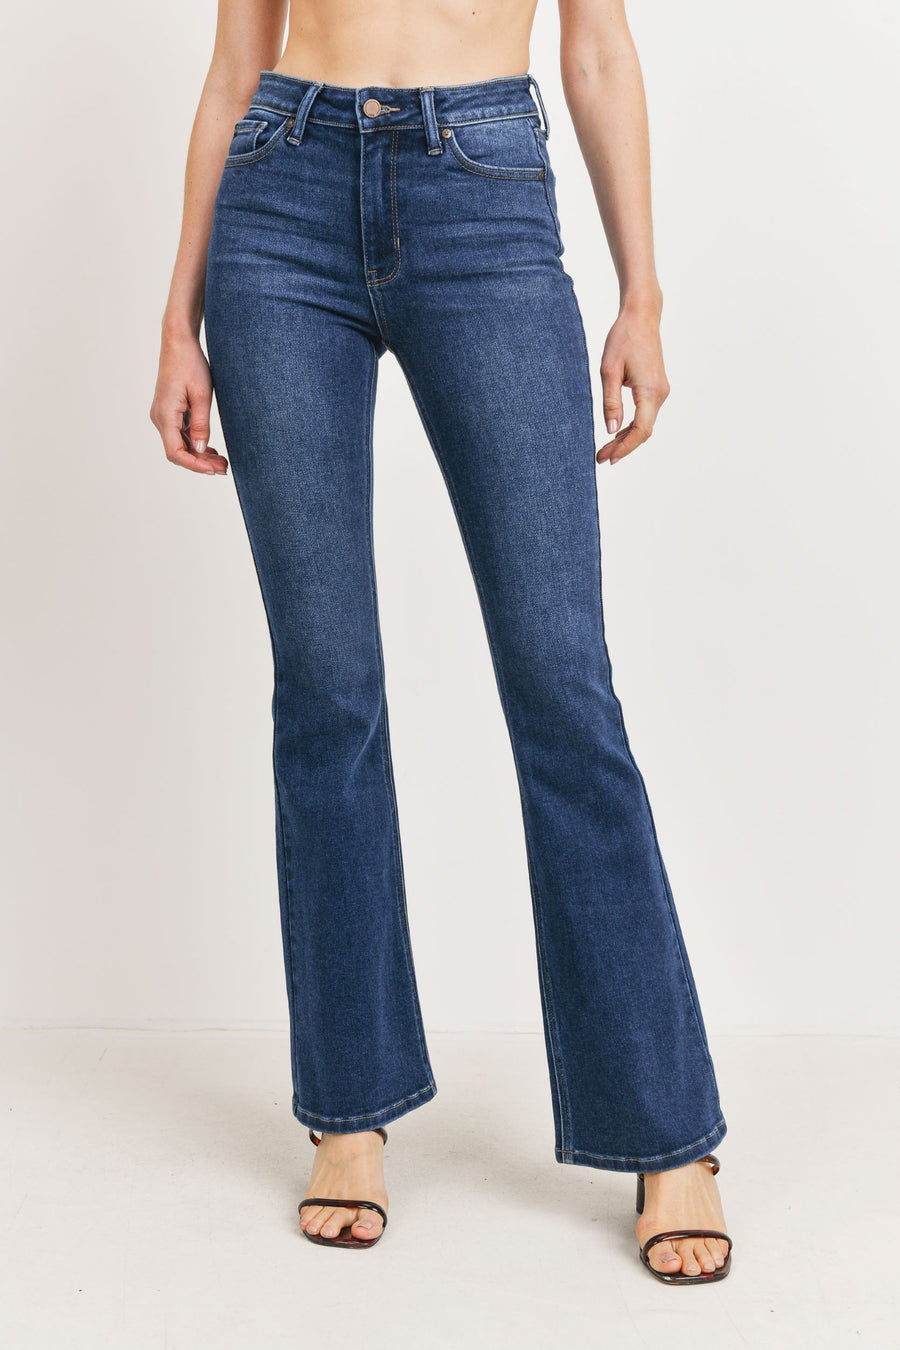 Long denim flare jeans with a button and zipper for closure in the front.